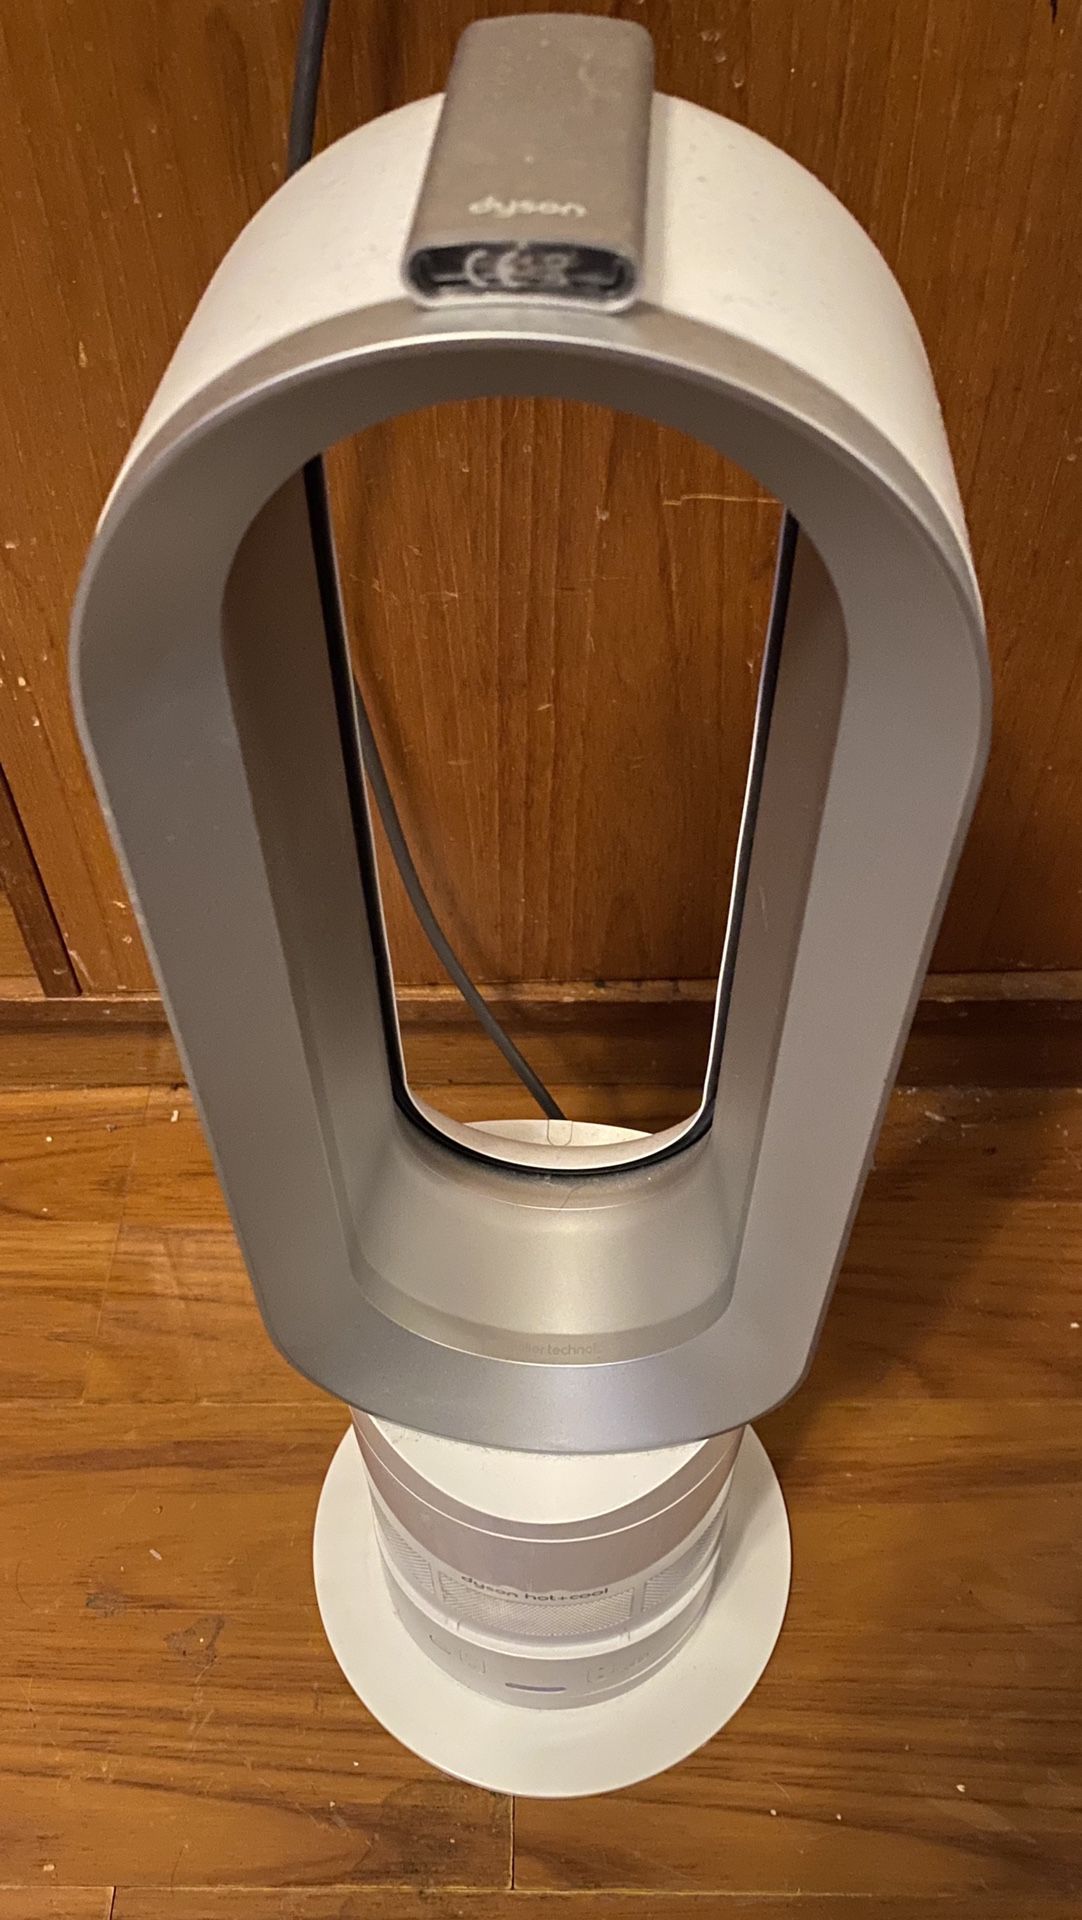 Dyson hot and cold fan